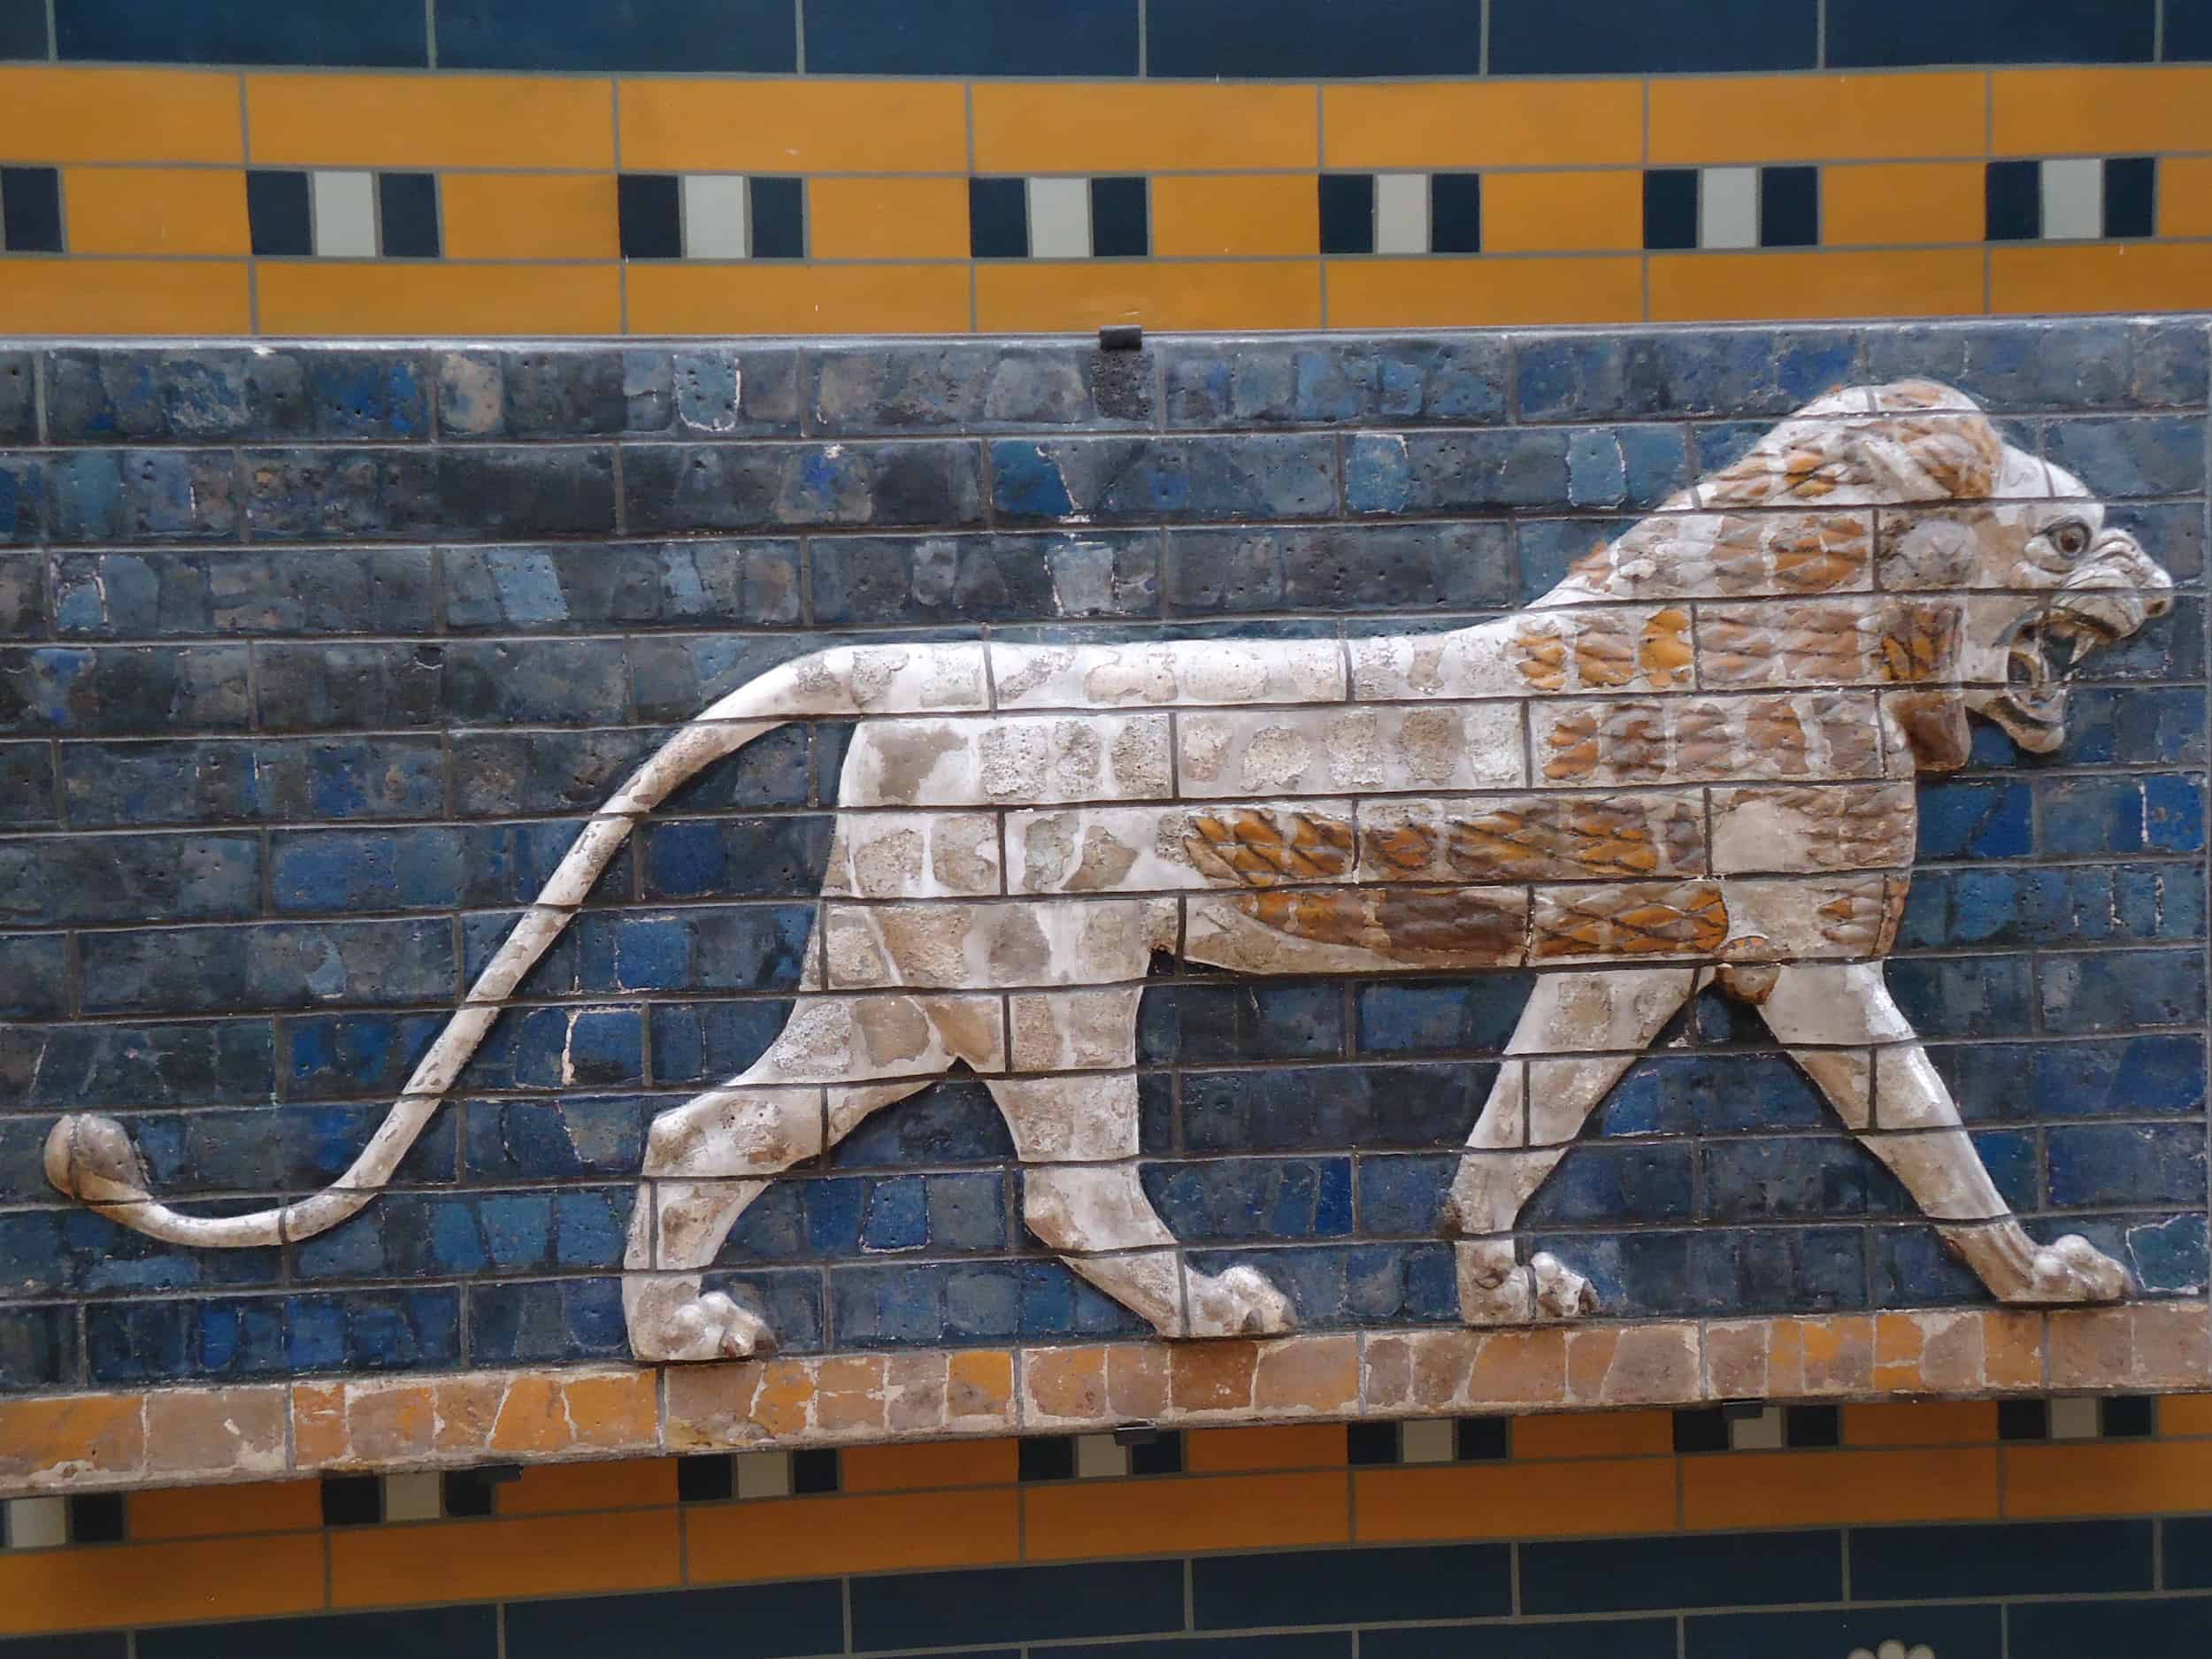 Glazed brick panel from the Processional Way to the Ishtar Gate in Babylon at the Museum of the Ancient Orient at the Istanbul Archaeology Museums in Istanbul, Turkey